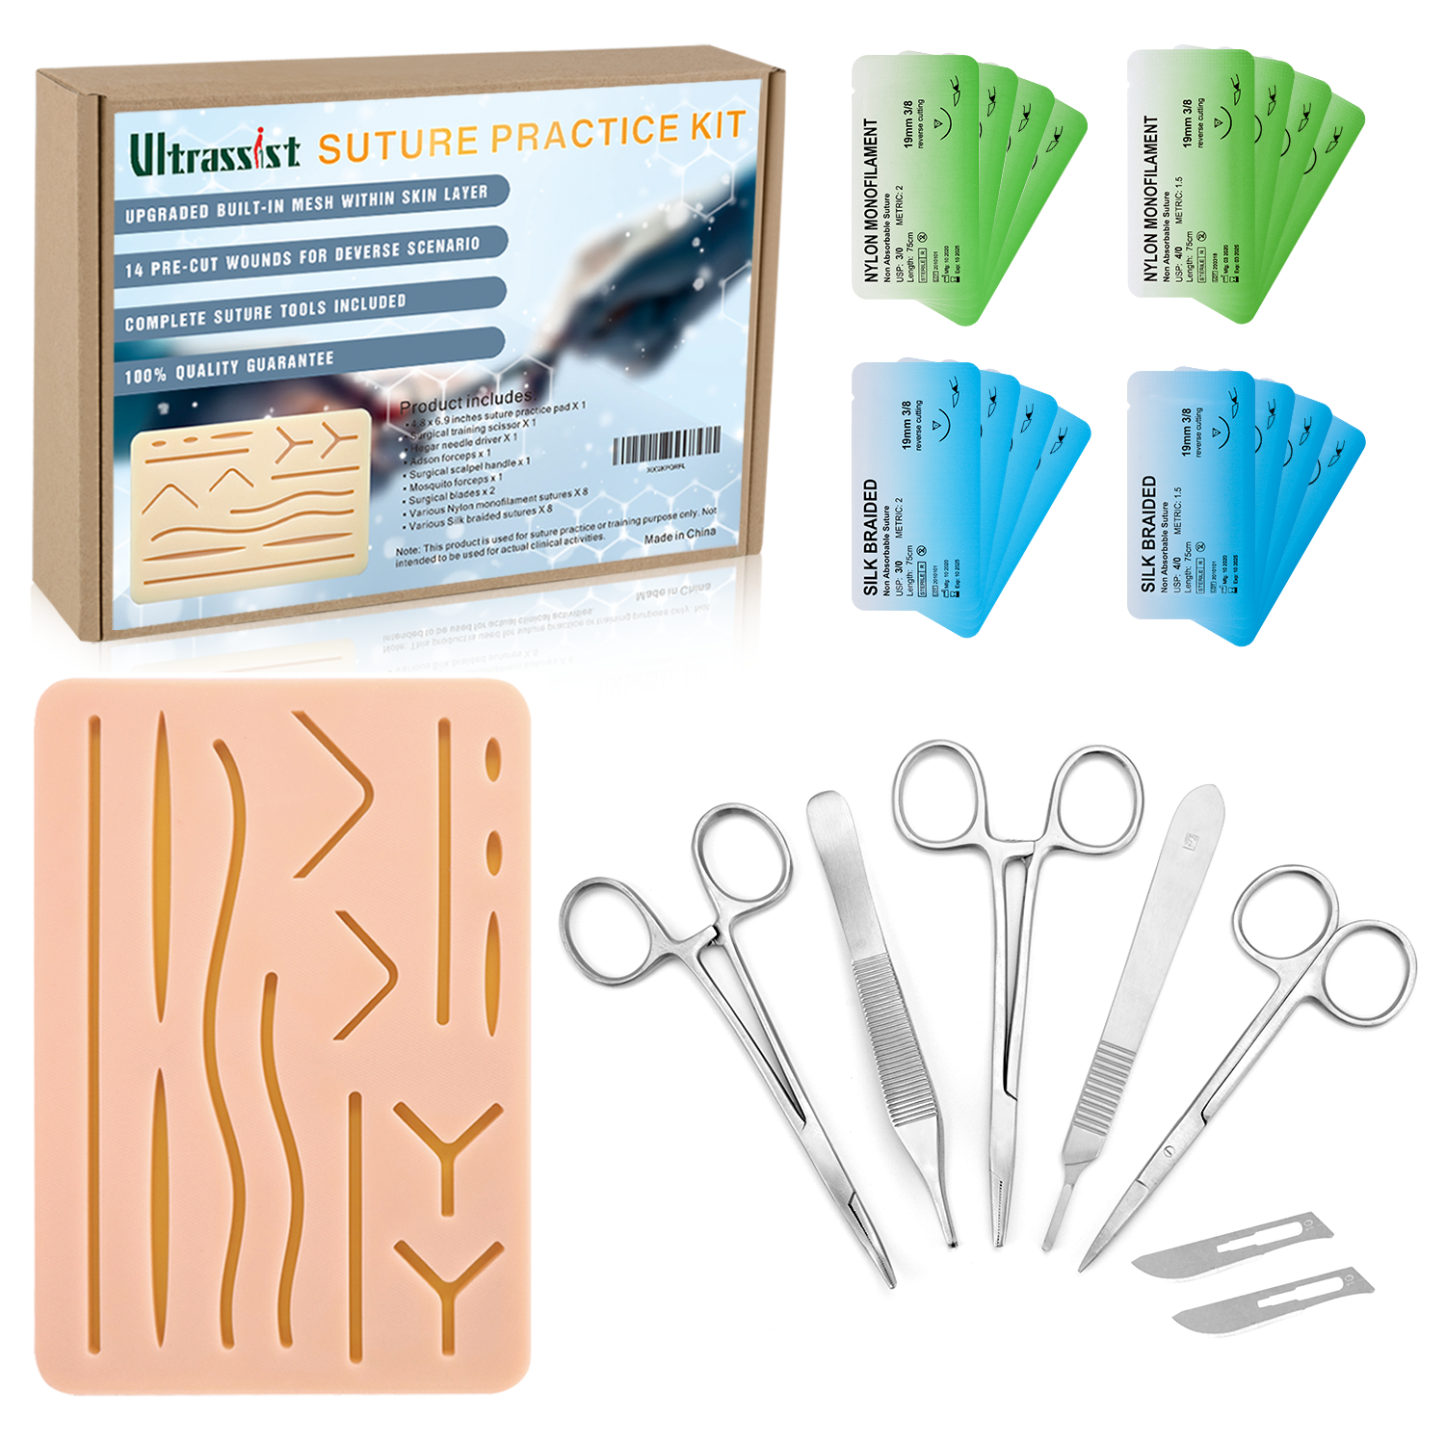 Ultrassist Suture Kit for Suture Training, Silicone Stitching Pad with Durable Embedded Mesh, Includes Suture Tools Kit & Various Suture Threads and